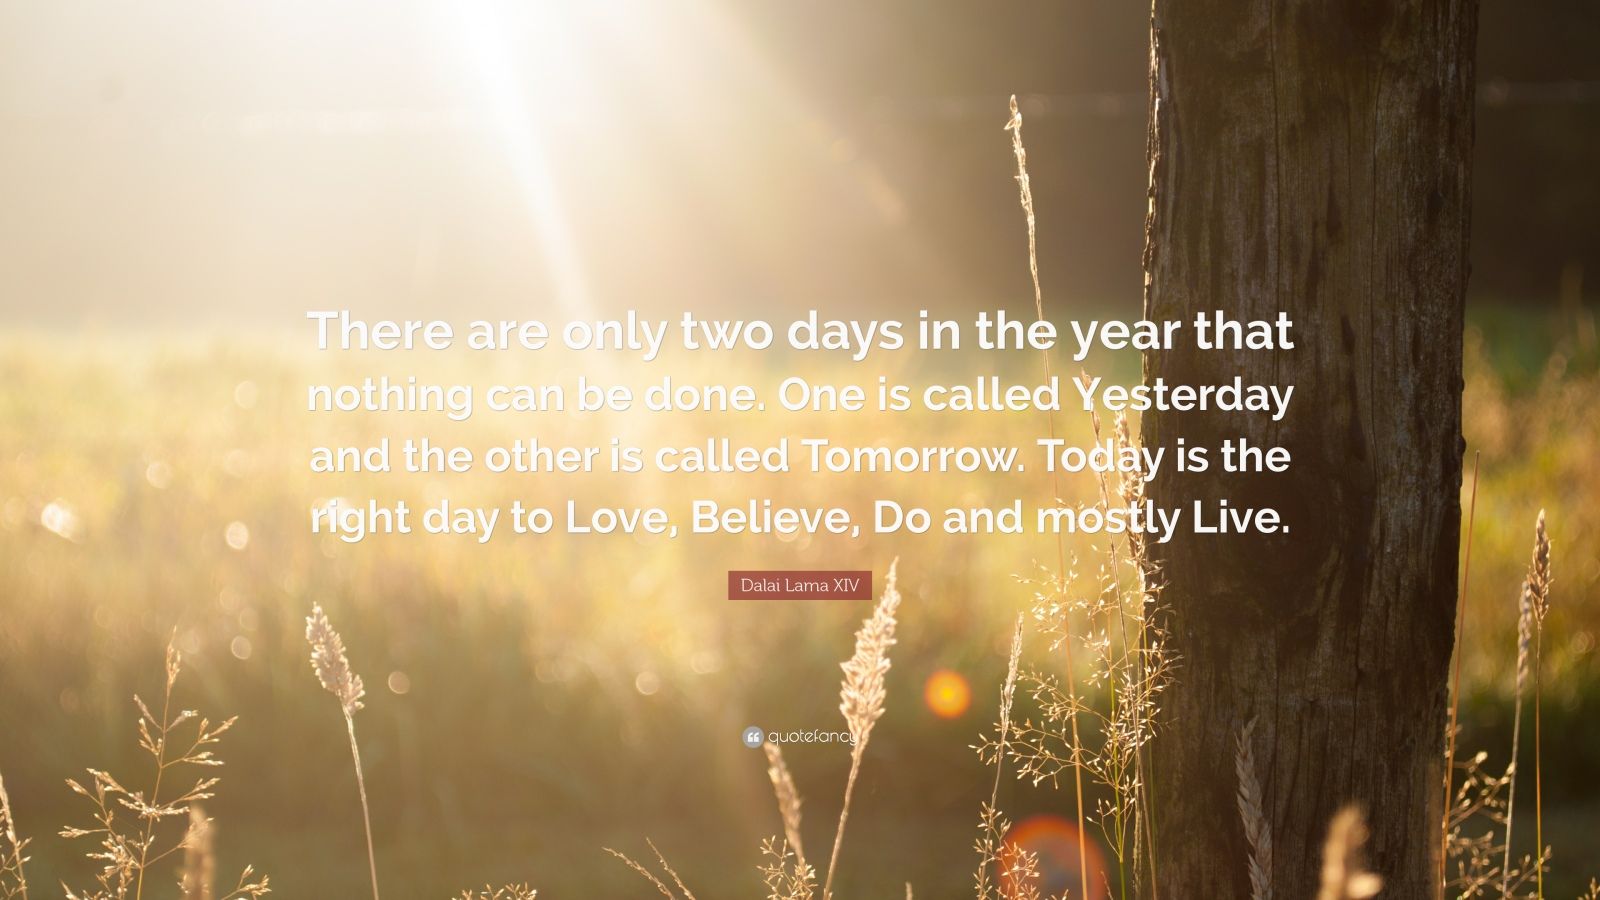 dalai lama quotes there are only two days